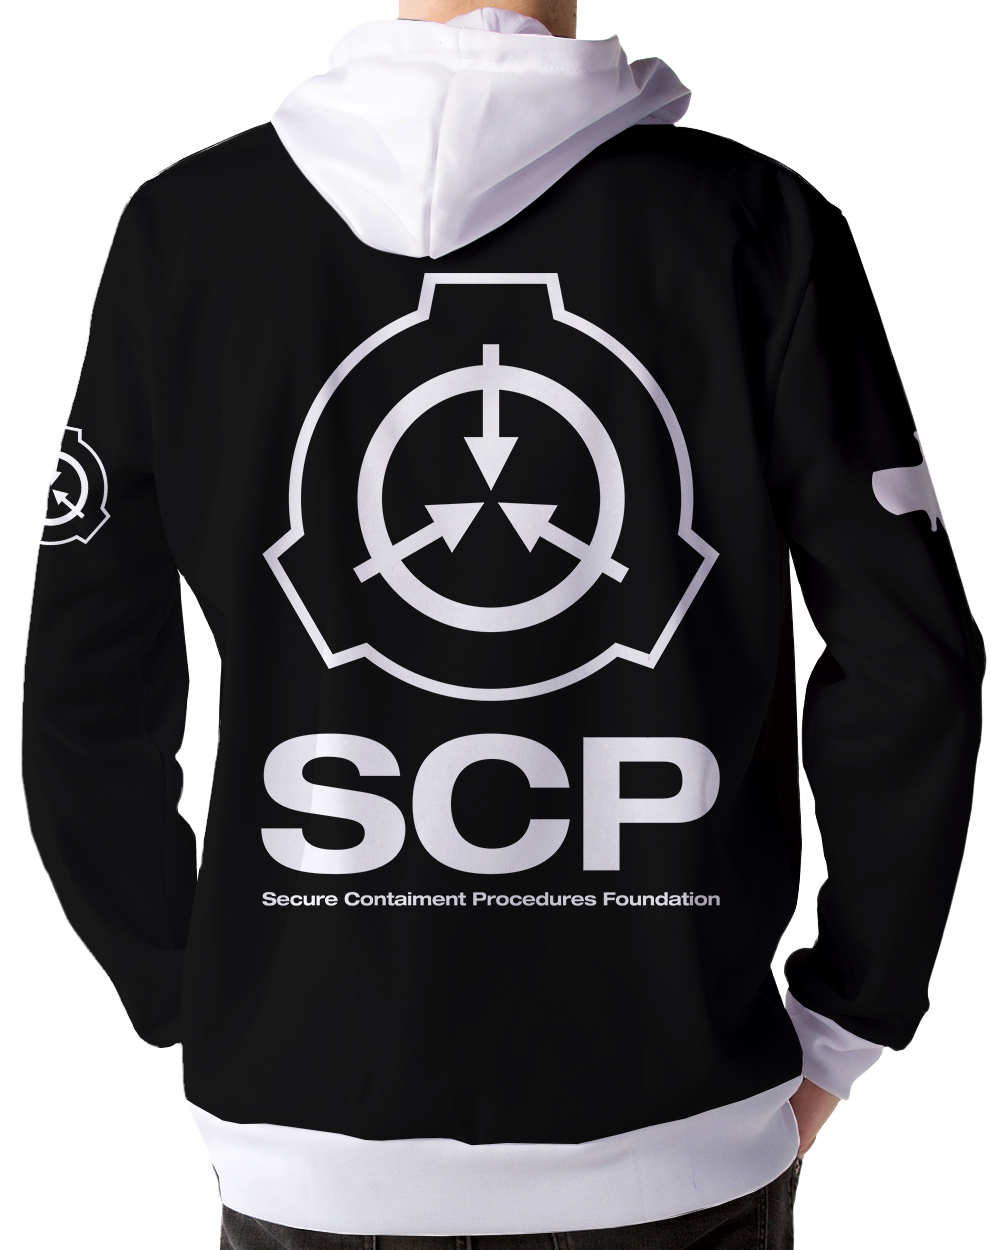 SCP FOUNDATION meet up at CAD : r/SCP